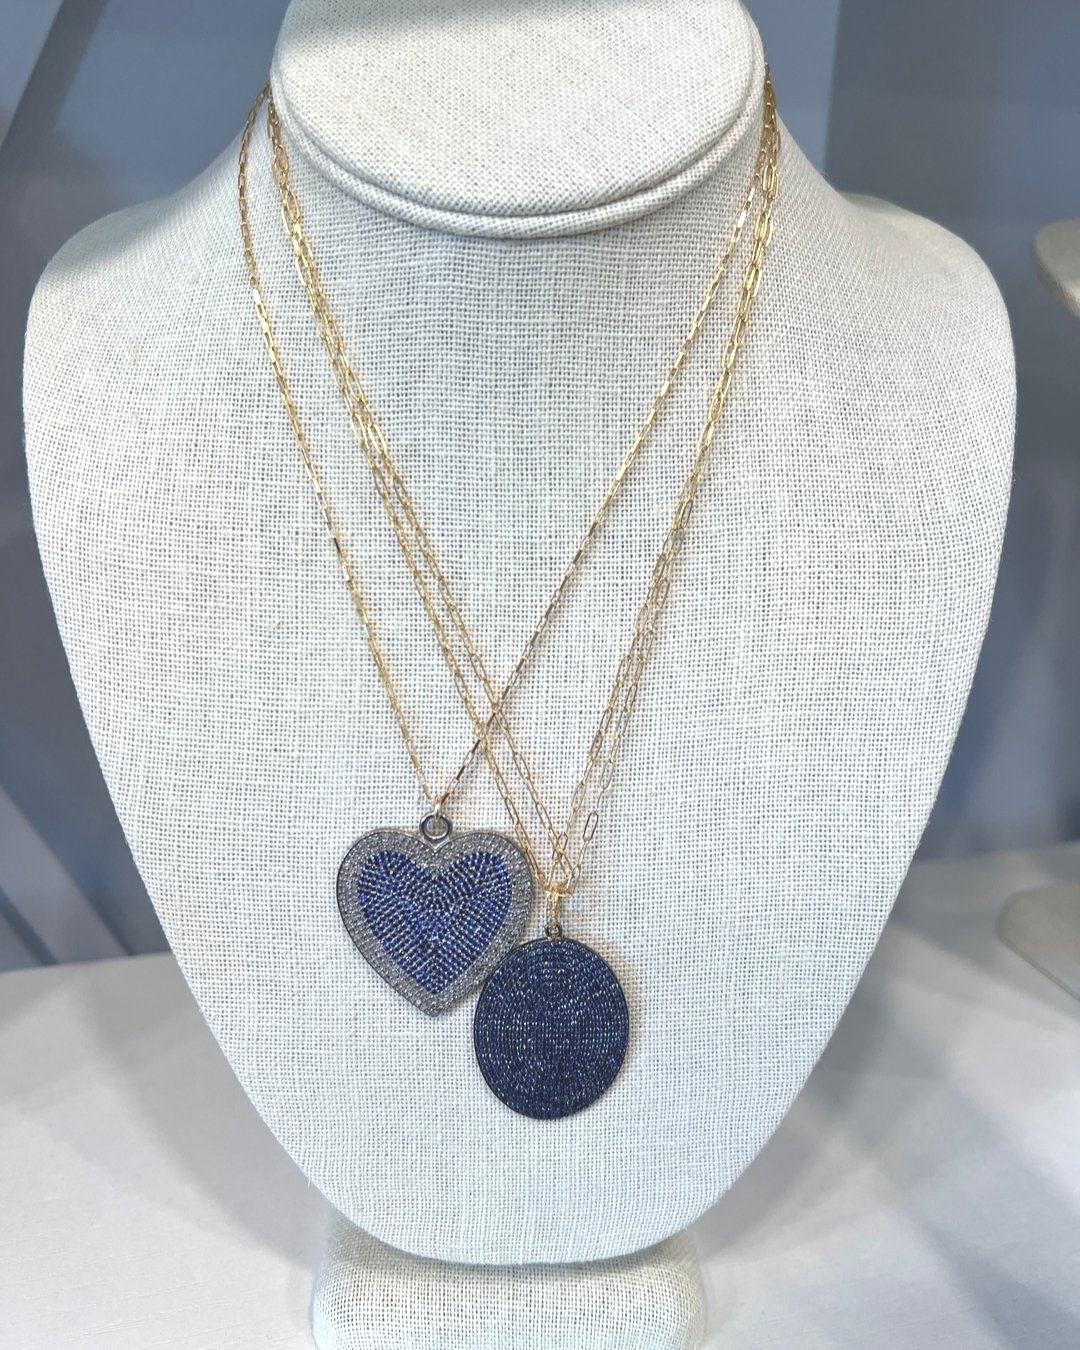 Mom loves bling! Make her day with something special. Diamonds and sapphires, anyone??!! #hamiltongracedesigns #shopmelange #shoposterville #osterville #shopthecape #capecod #jewelry #jewelrydesigner #bagsbagsbags #handbags #custommade #shopcollabora